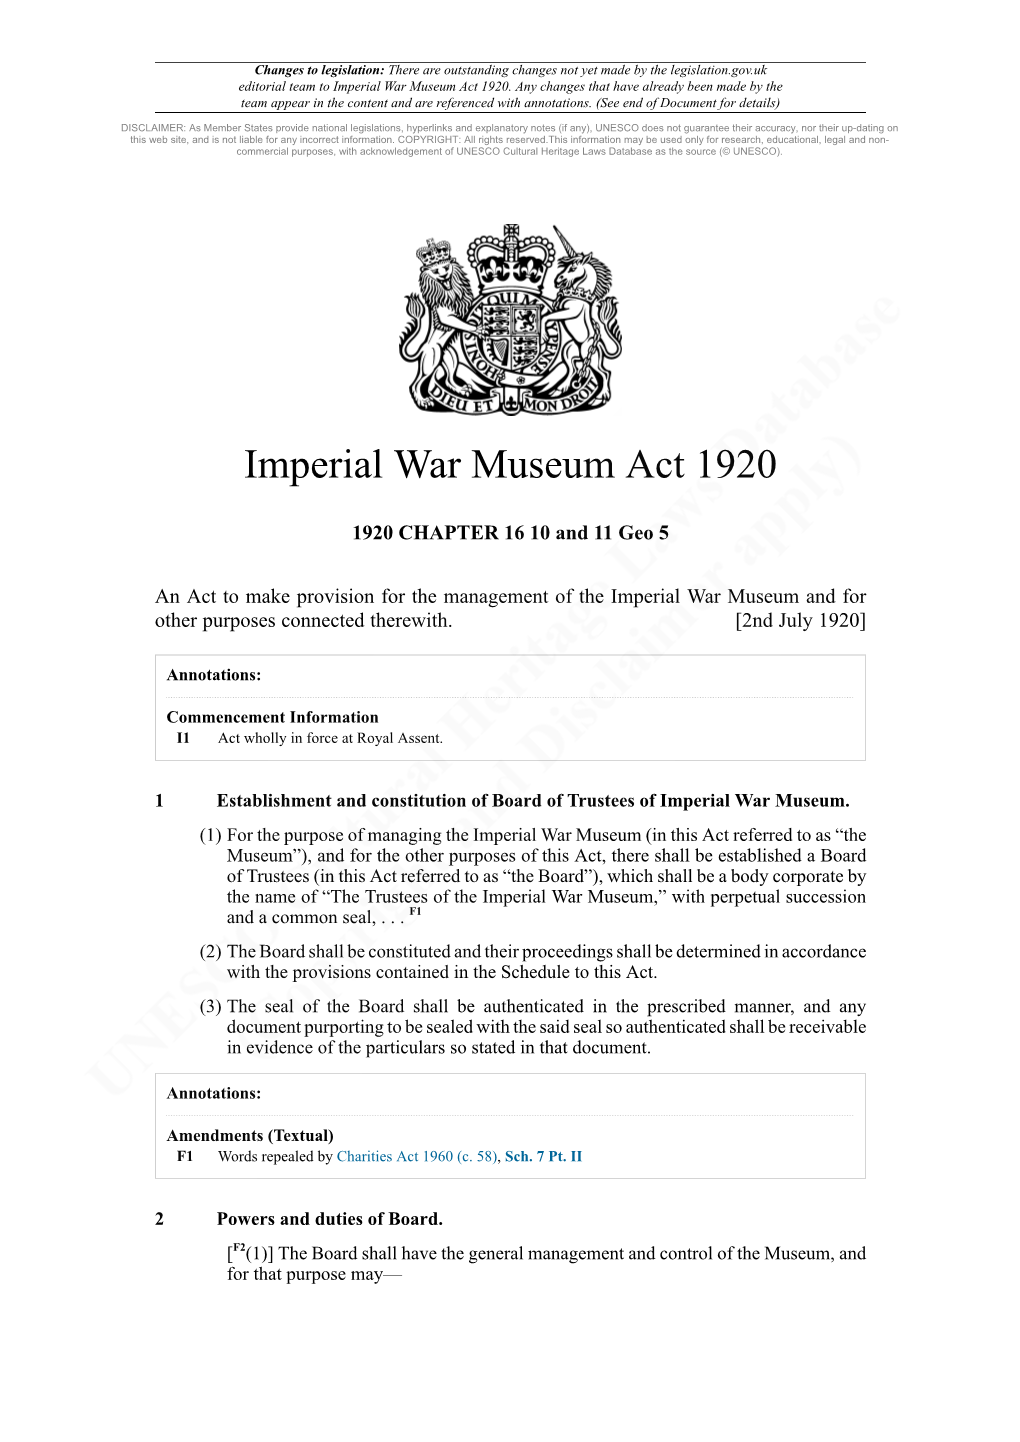 Imperial War Museum Act 1920